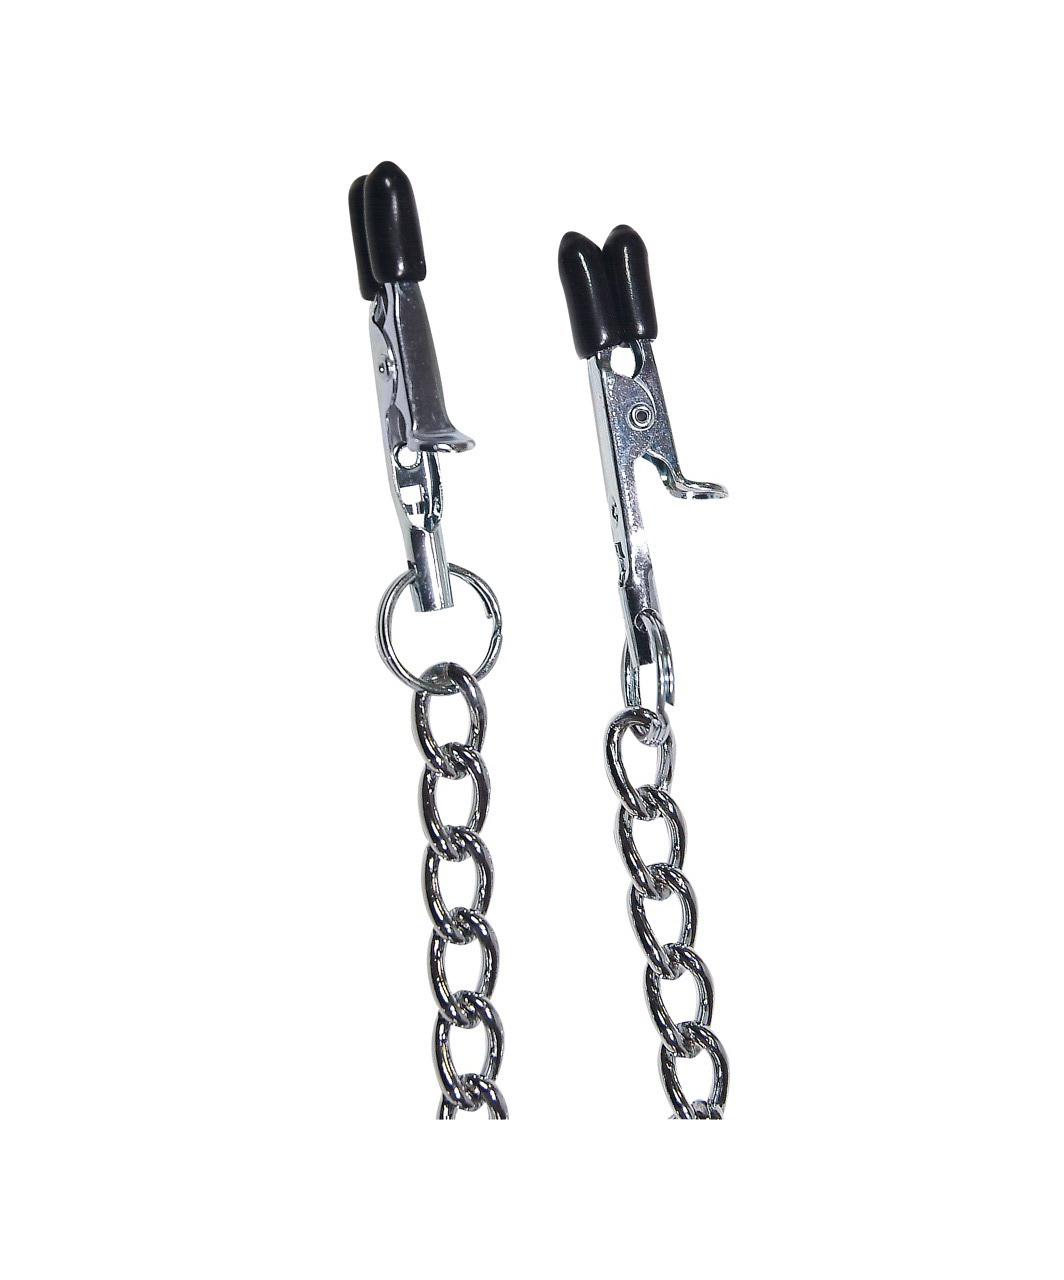 Sextreme chain harness with clamps